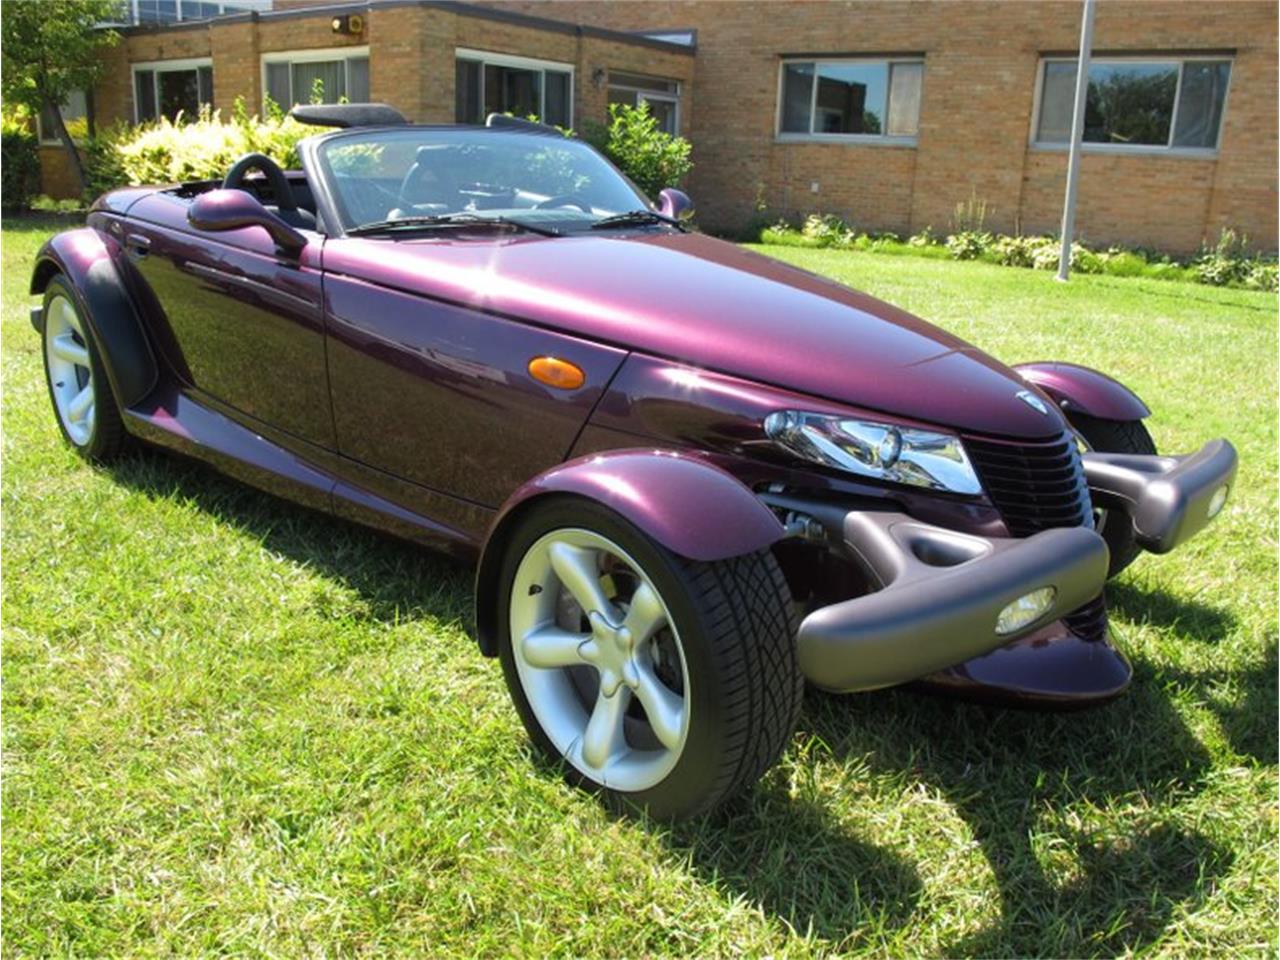 1999 Plymouth Prowler for Sale ClassicCars com CC 1292689